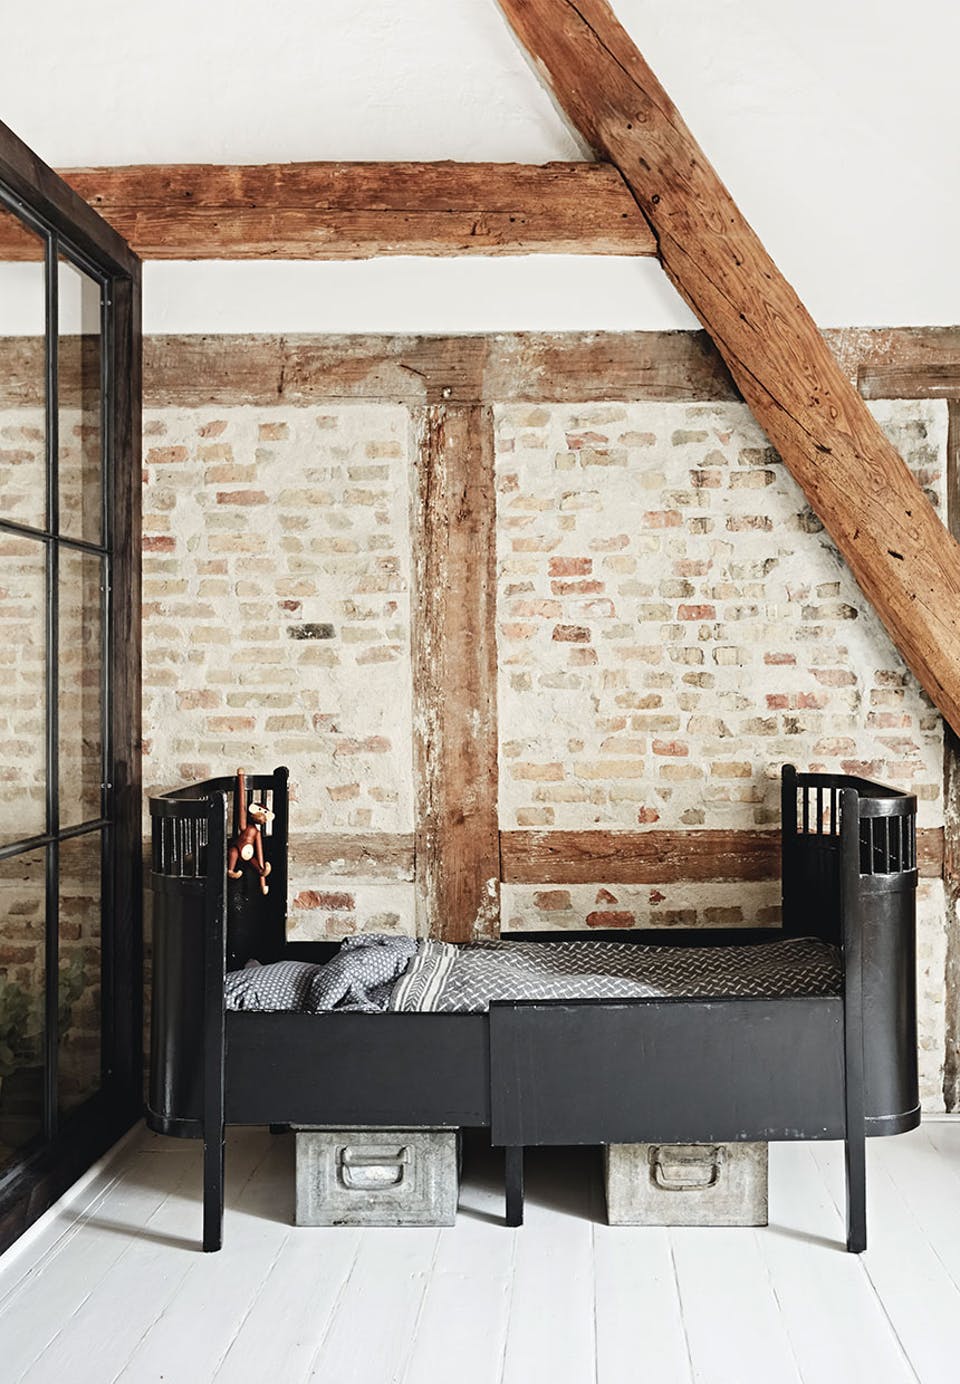 The kid's room is a boy's space, there are beams and brick walls and a vintage metal bed, a metal box under the bed is used for storage